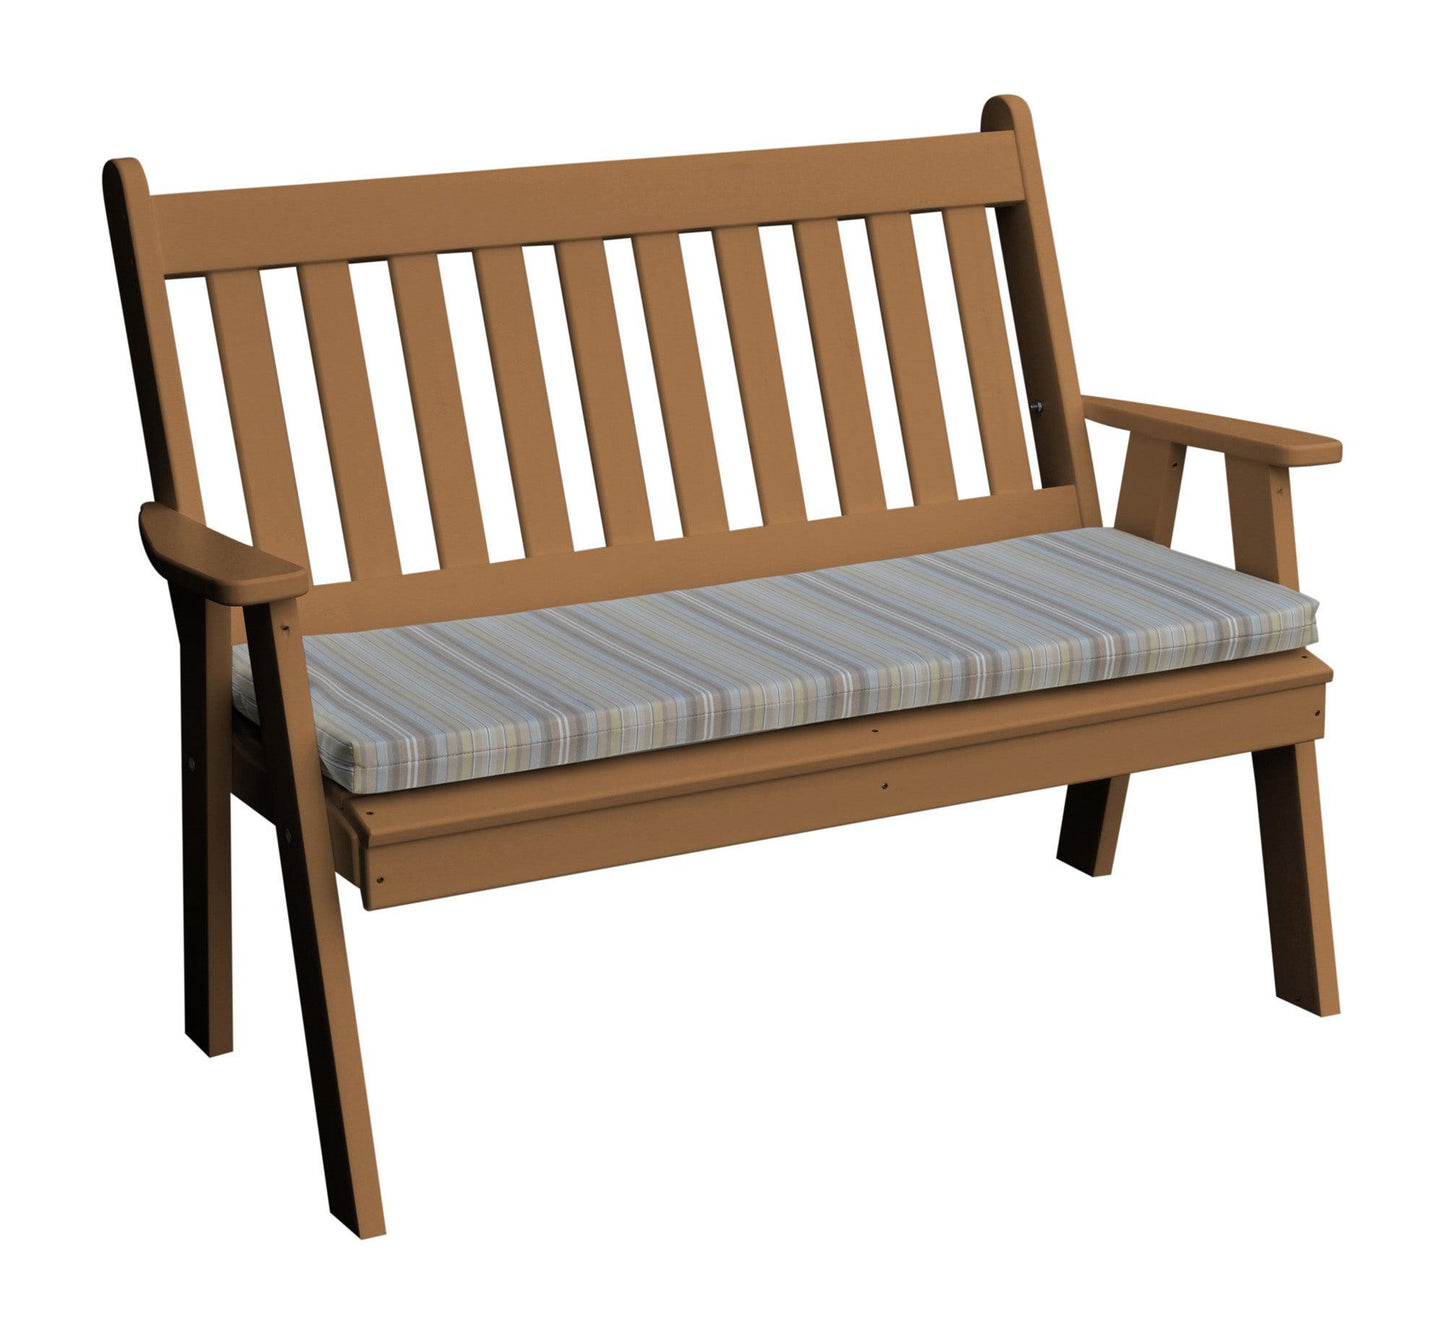 A&L Furniture Company Recycled Plastic 5' Traditional English Garden Bench - LEAD TIME TO SHIP 10 BUSINESS DAYS